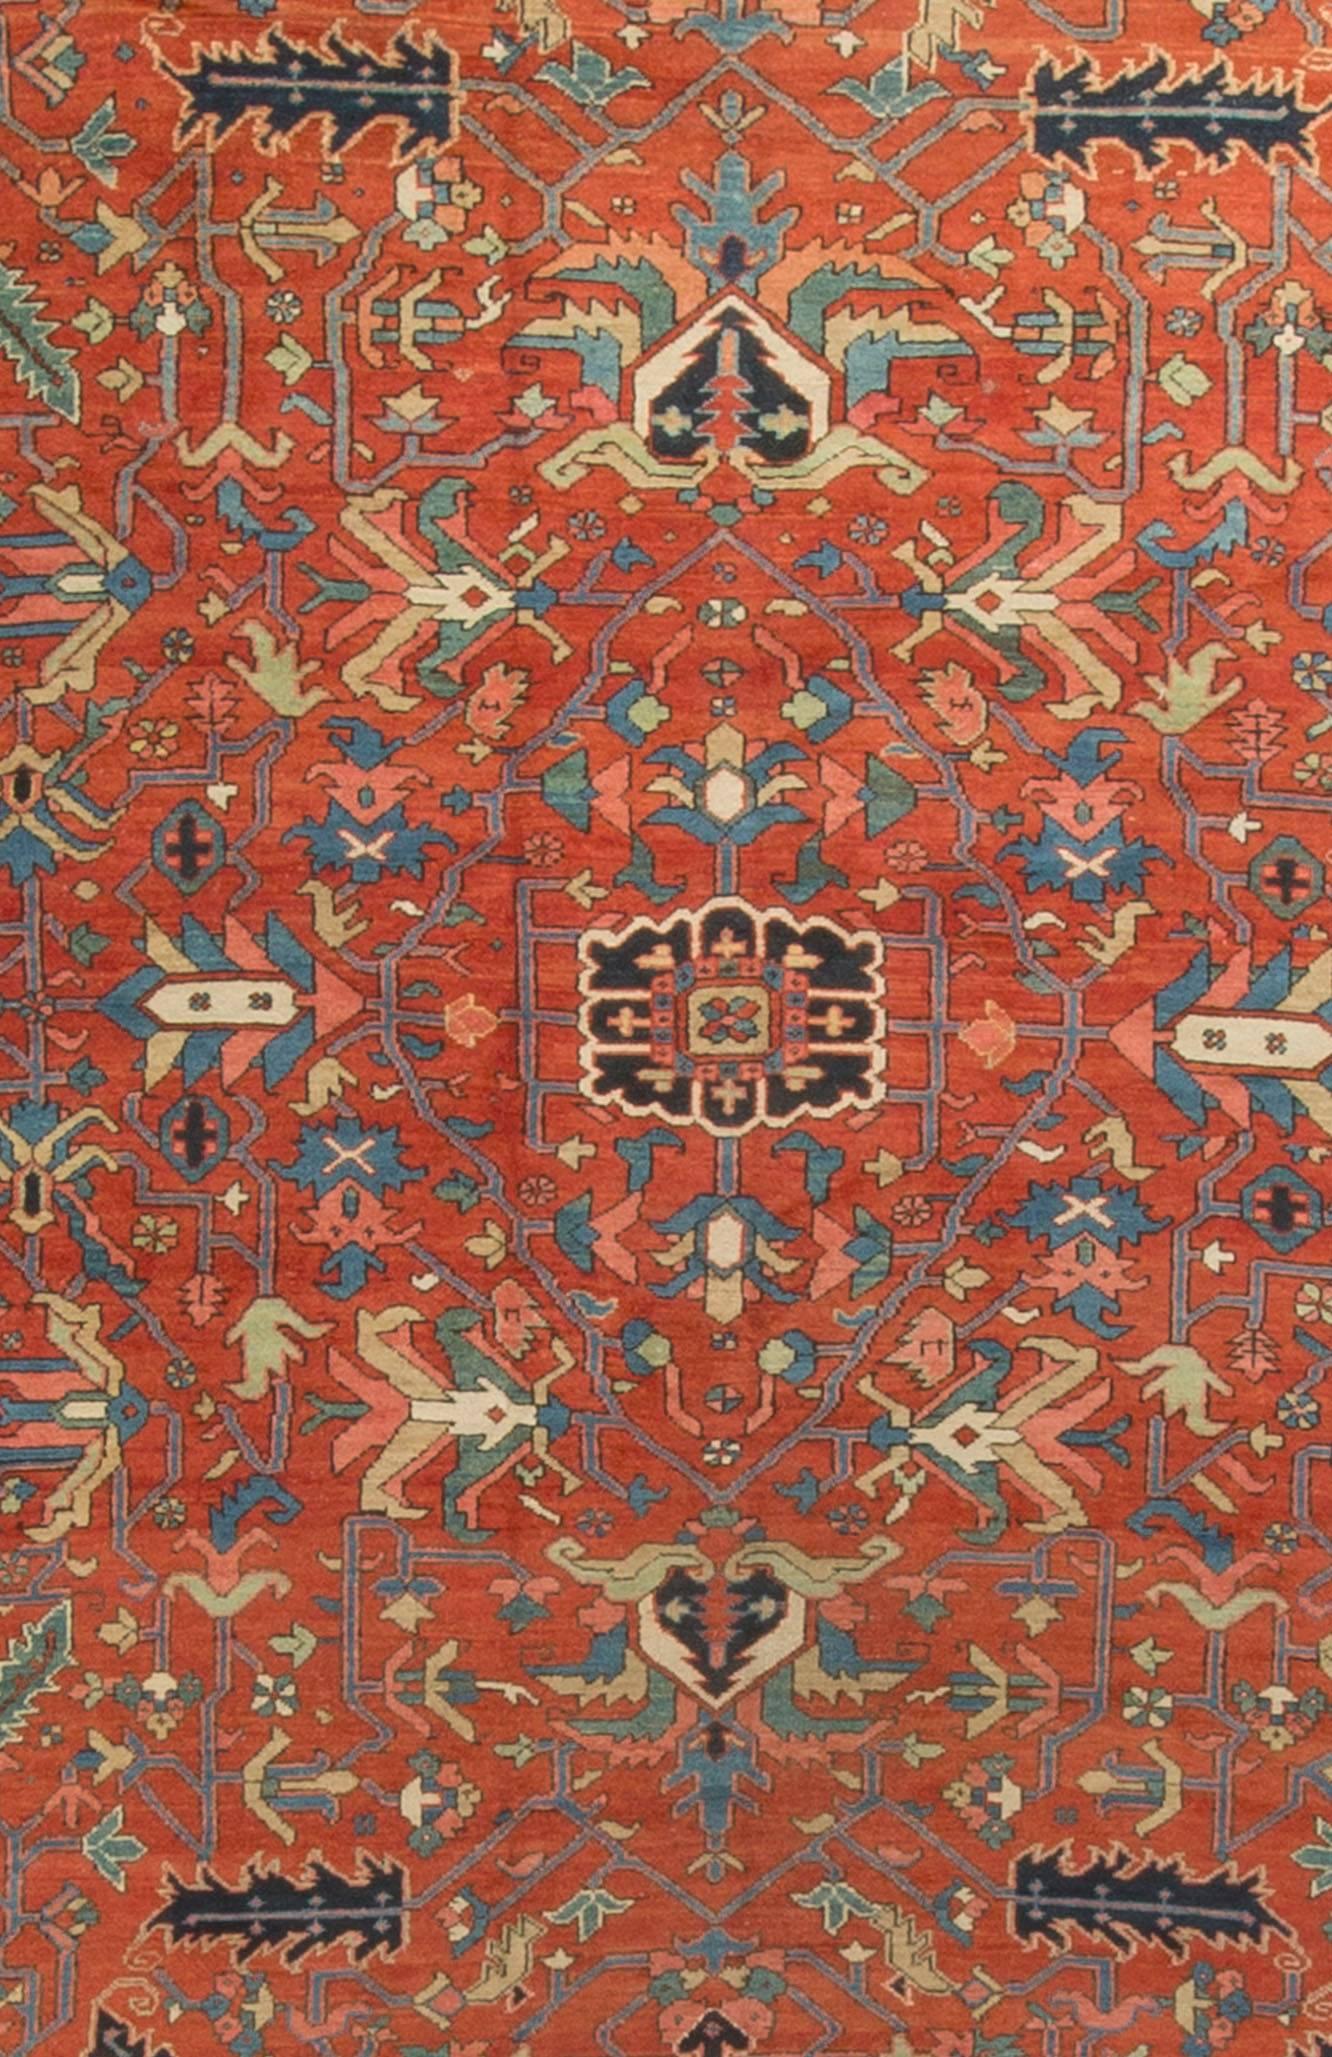 Vintage Persian Heriz rug, circa 1940. Measures: 8'6 x 11'6. The central field filled with leaves, branches and other floral elements. The narrow main border repeats the theme to create this Heriz rug whose style suits so well country homes to